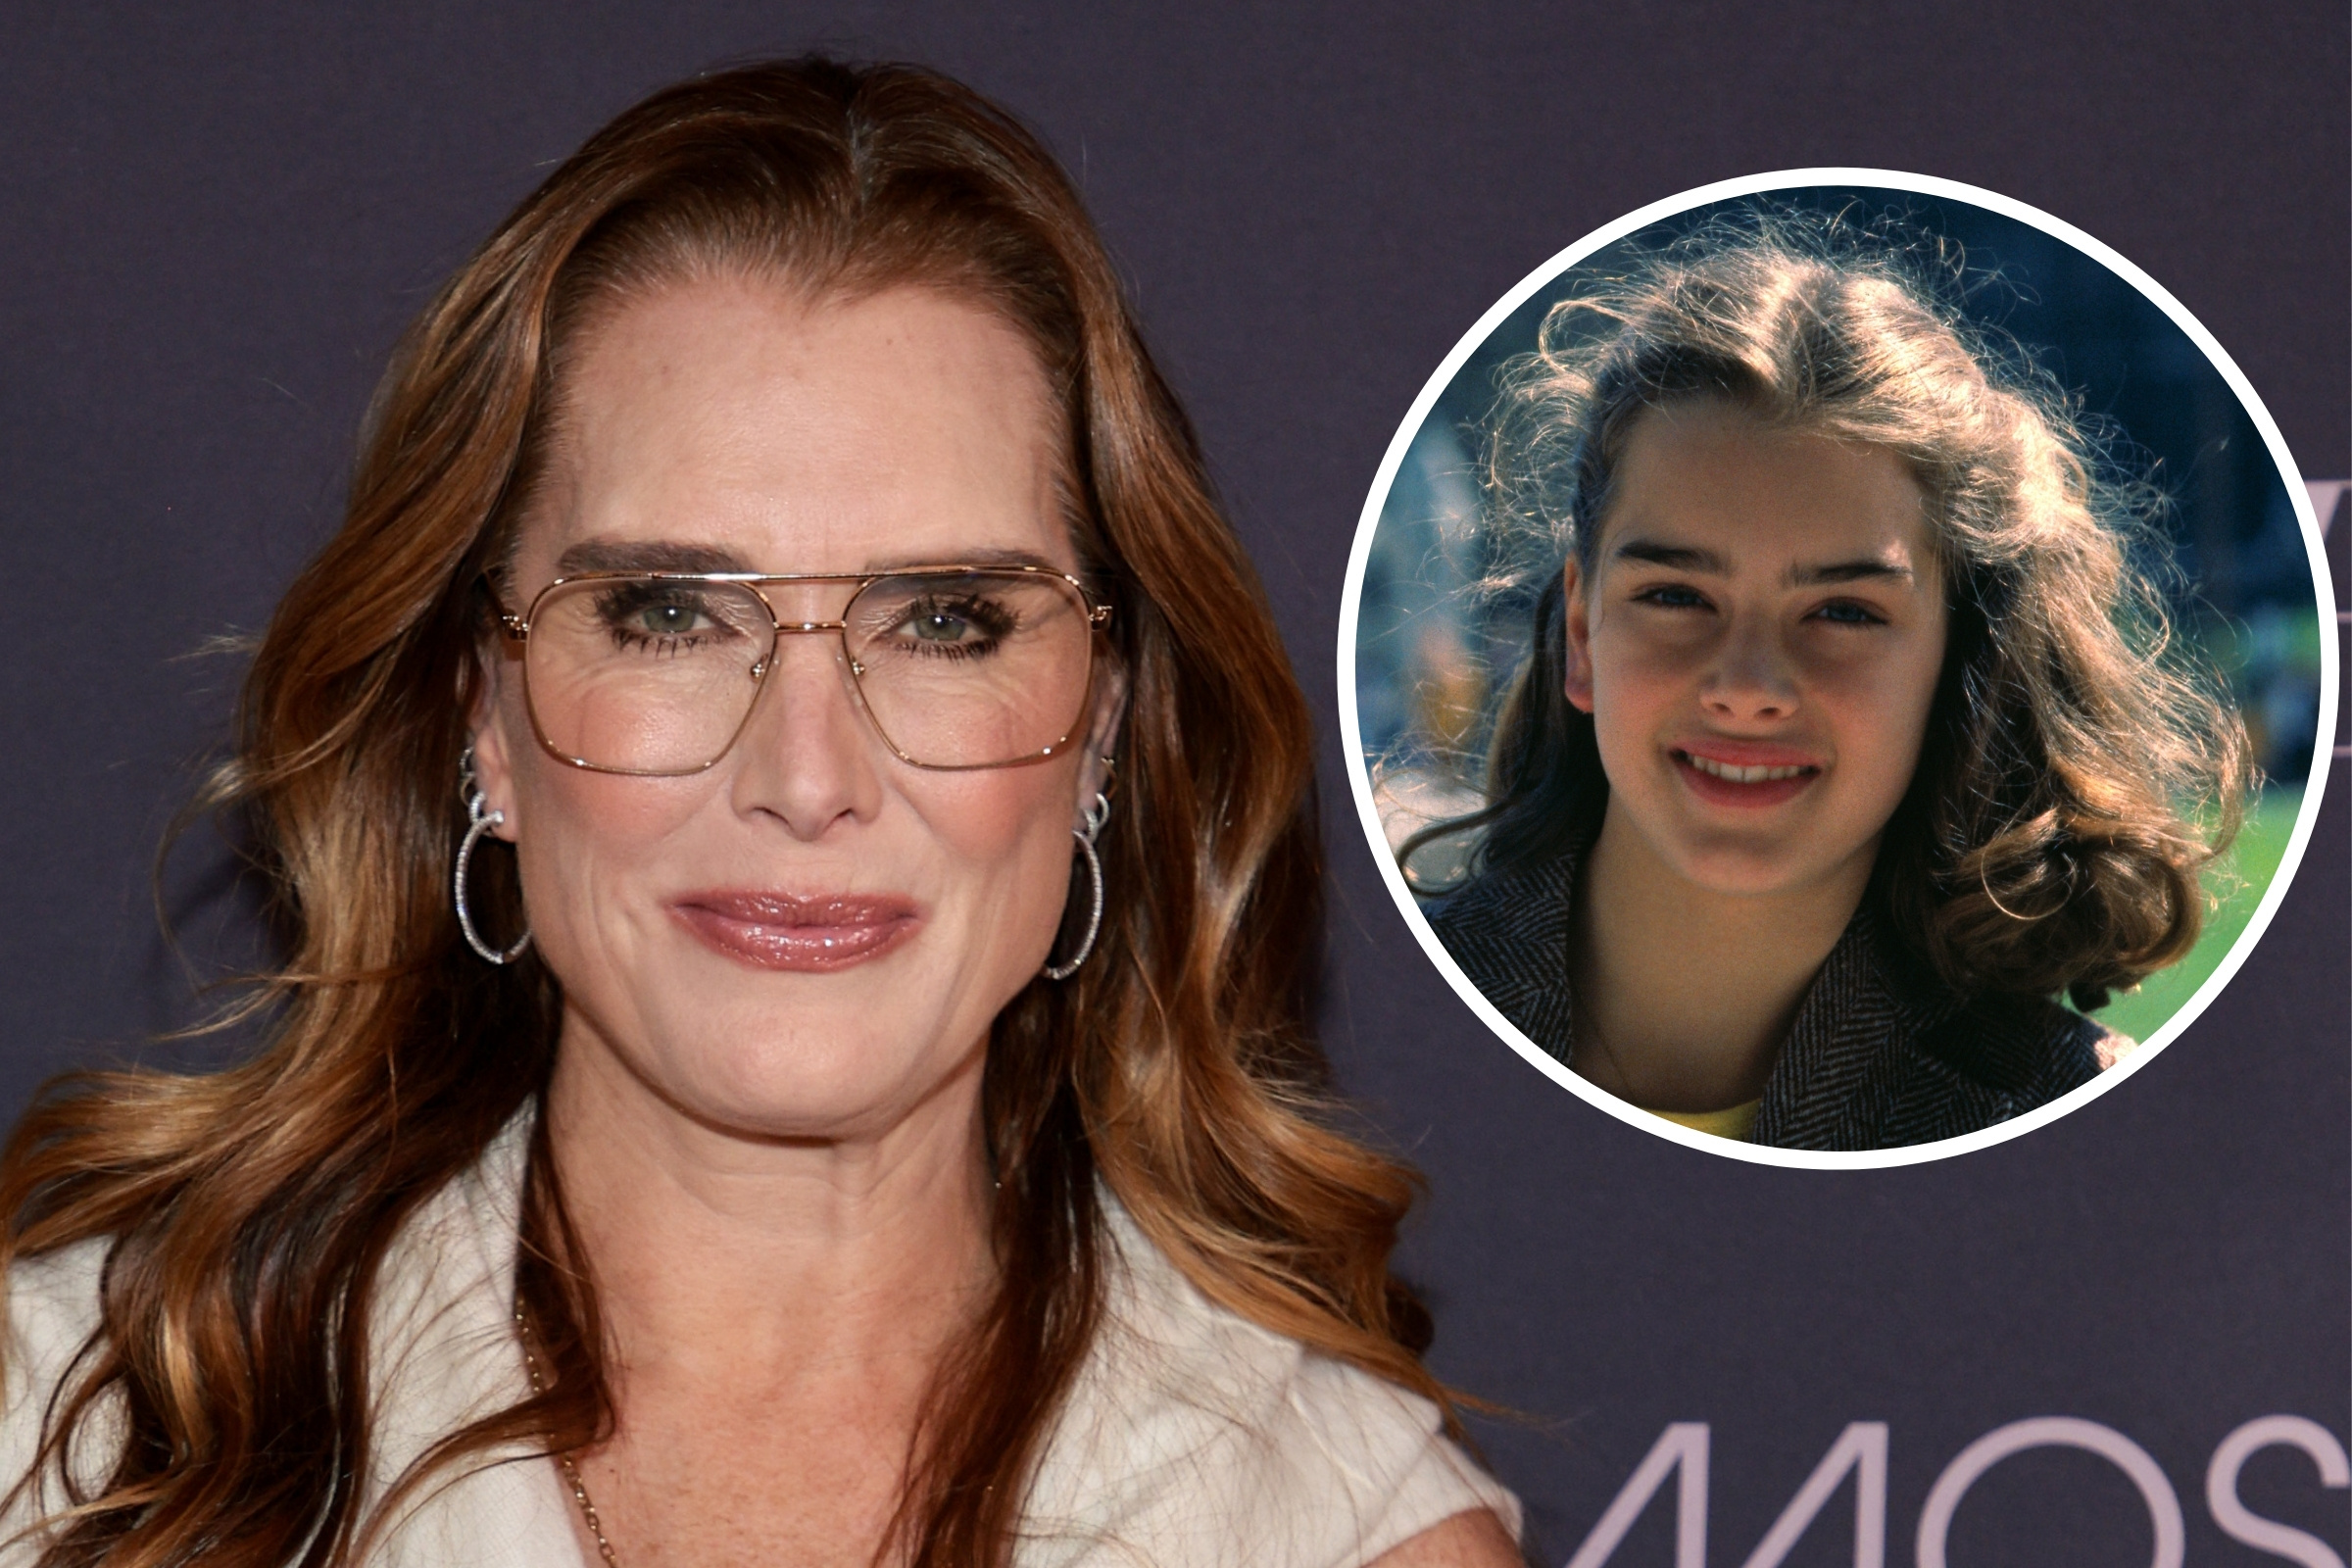 Resurfaced 1978 Article Sexualizing Brooke Shields, 12, Sparks Outrage